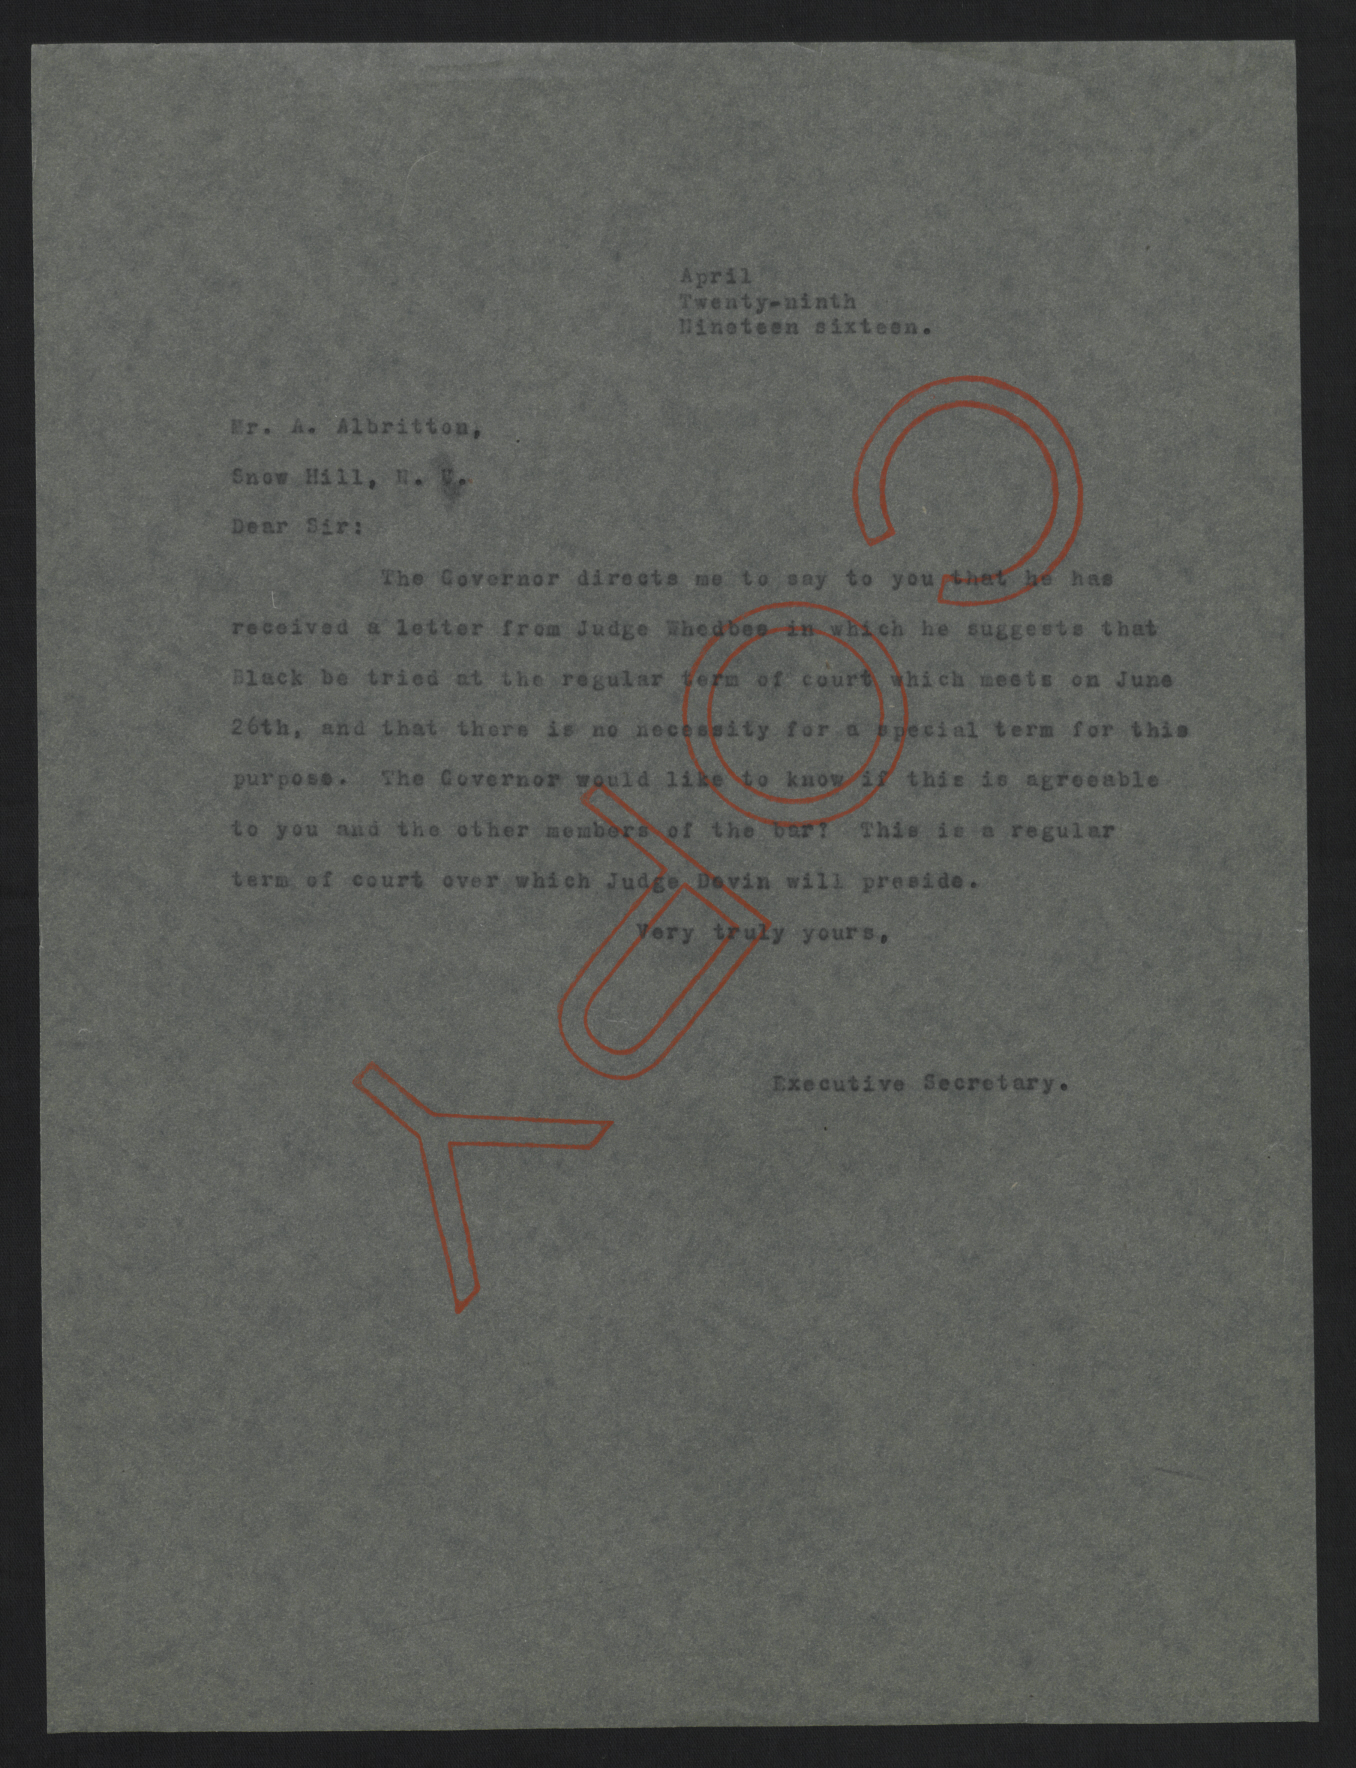 Letter from Jones to Albritton, April 29, 1916